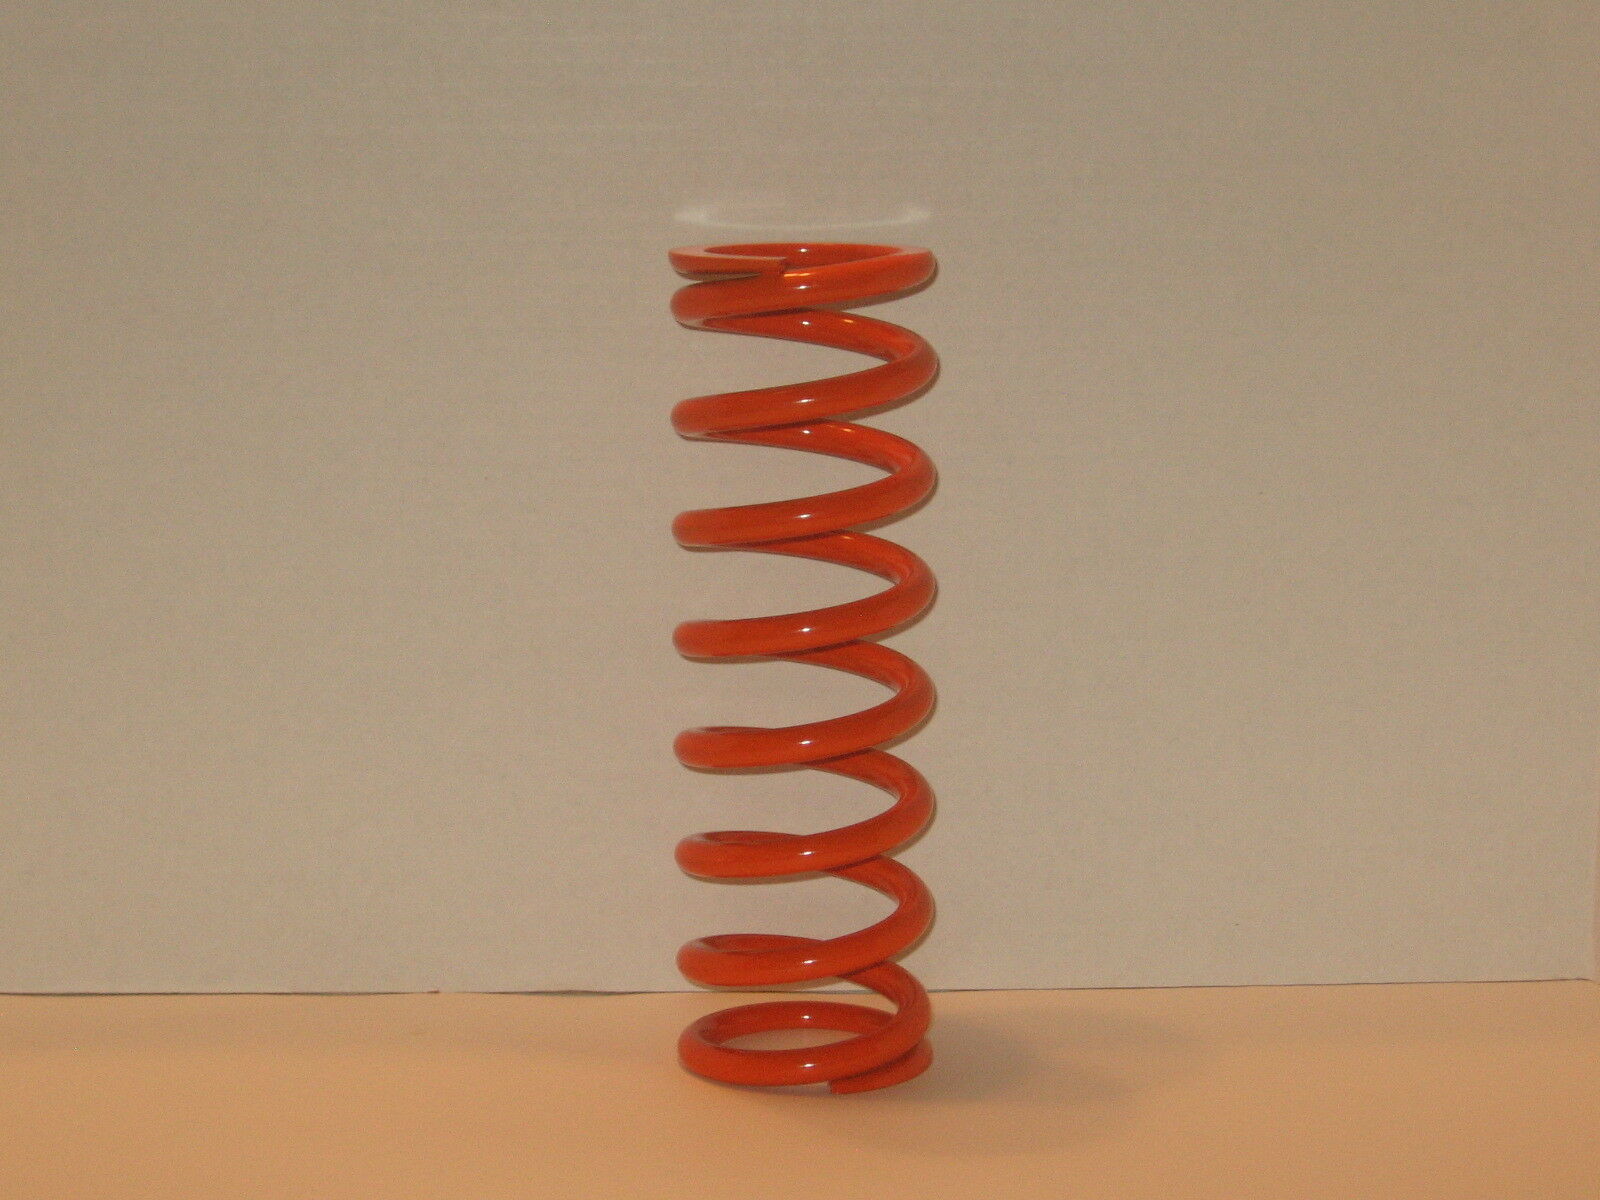 New Vogtland 375# 11 inch coil-over springs at new low prices